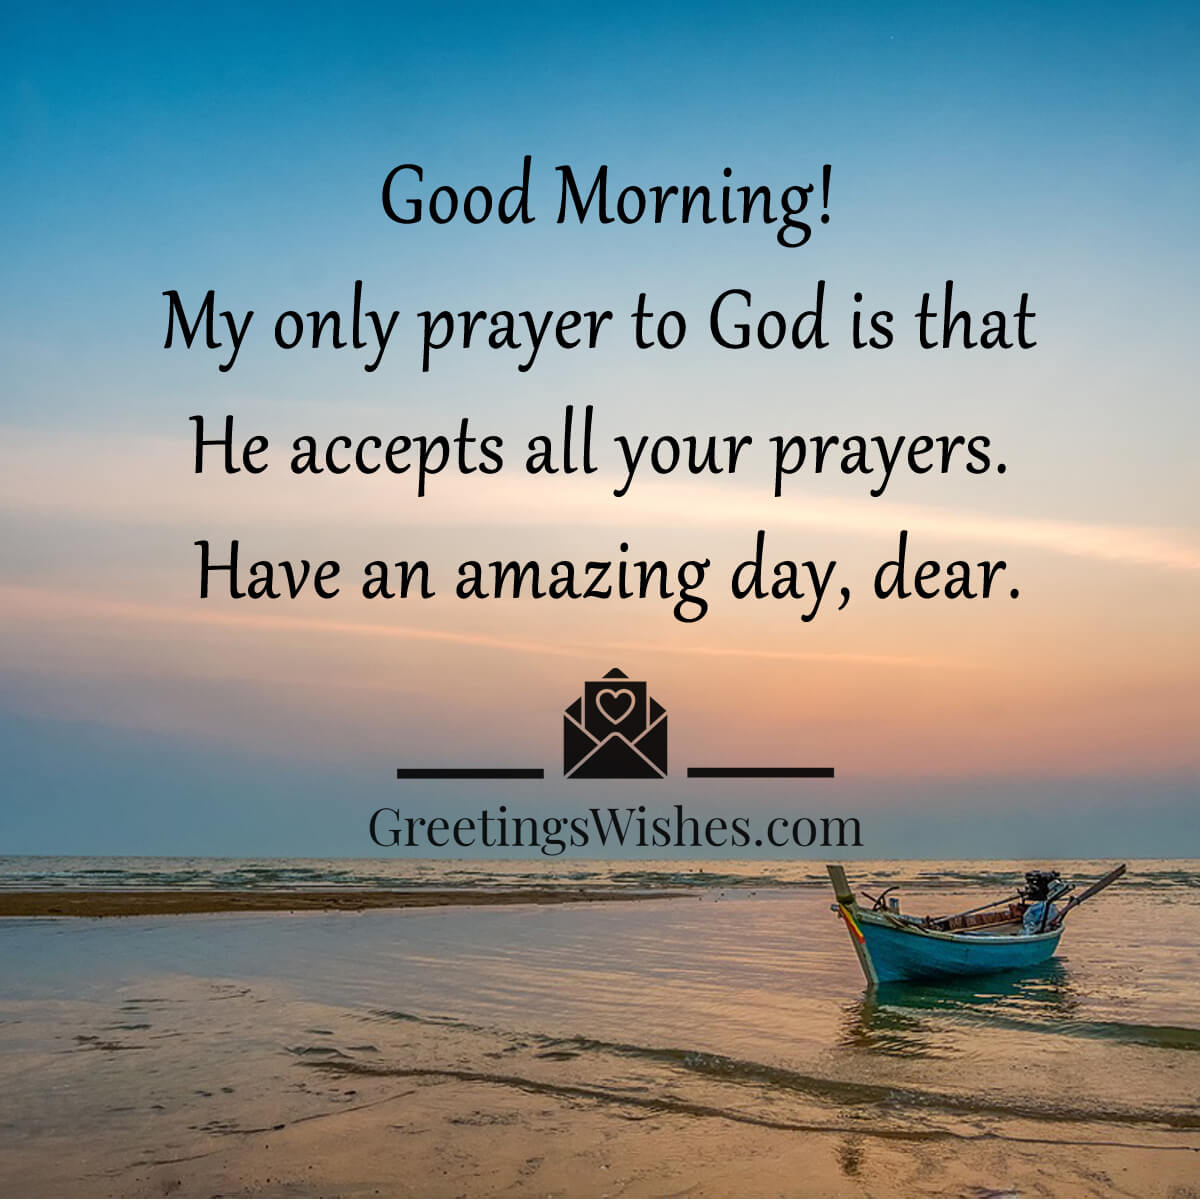 Good Morning Prayer Wishes - Greetings Wishes